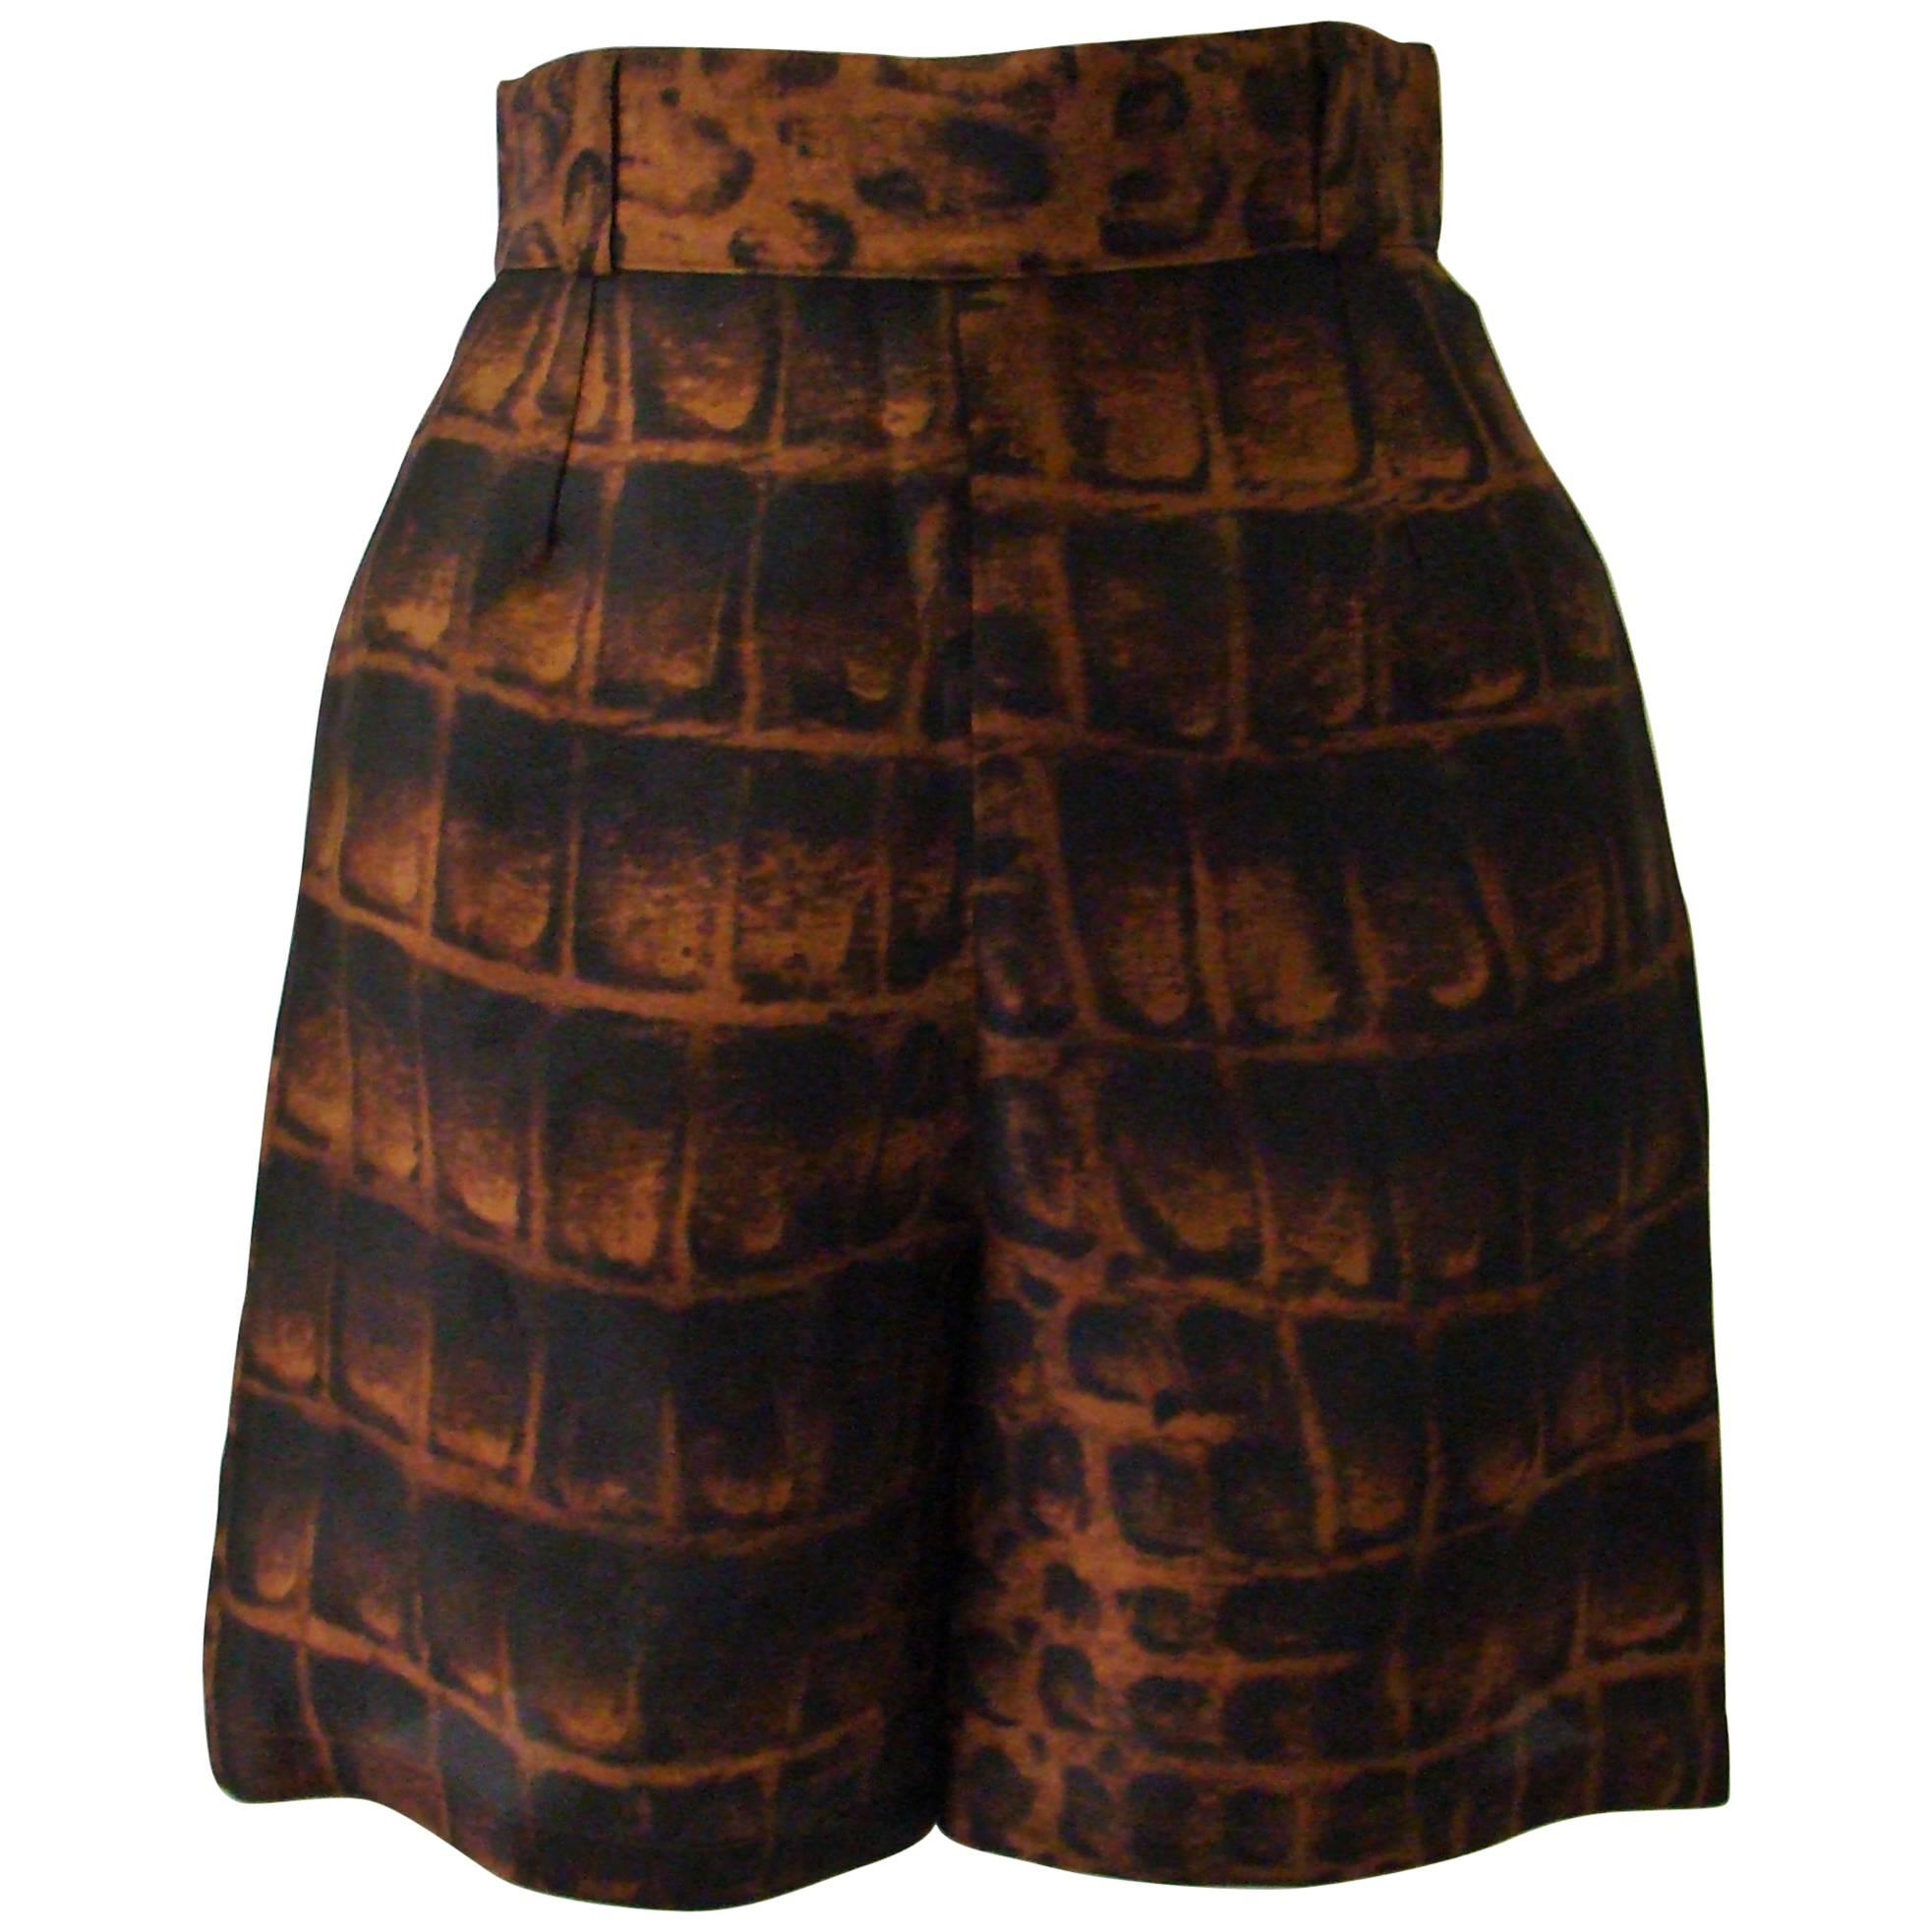 Gianni Versace Couture Silk Organza Printed Shorts Spring 1992 For Sale